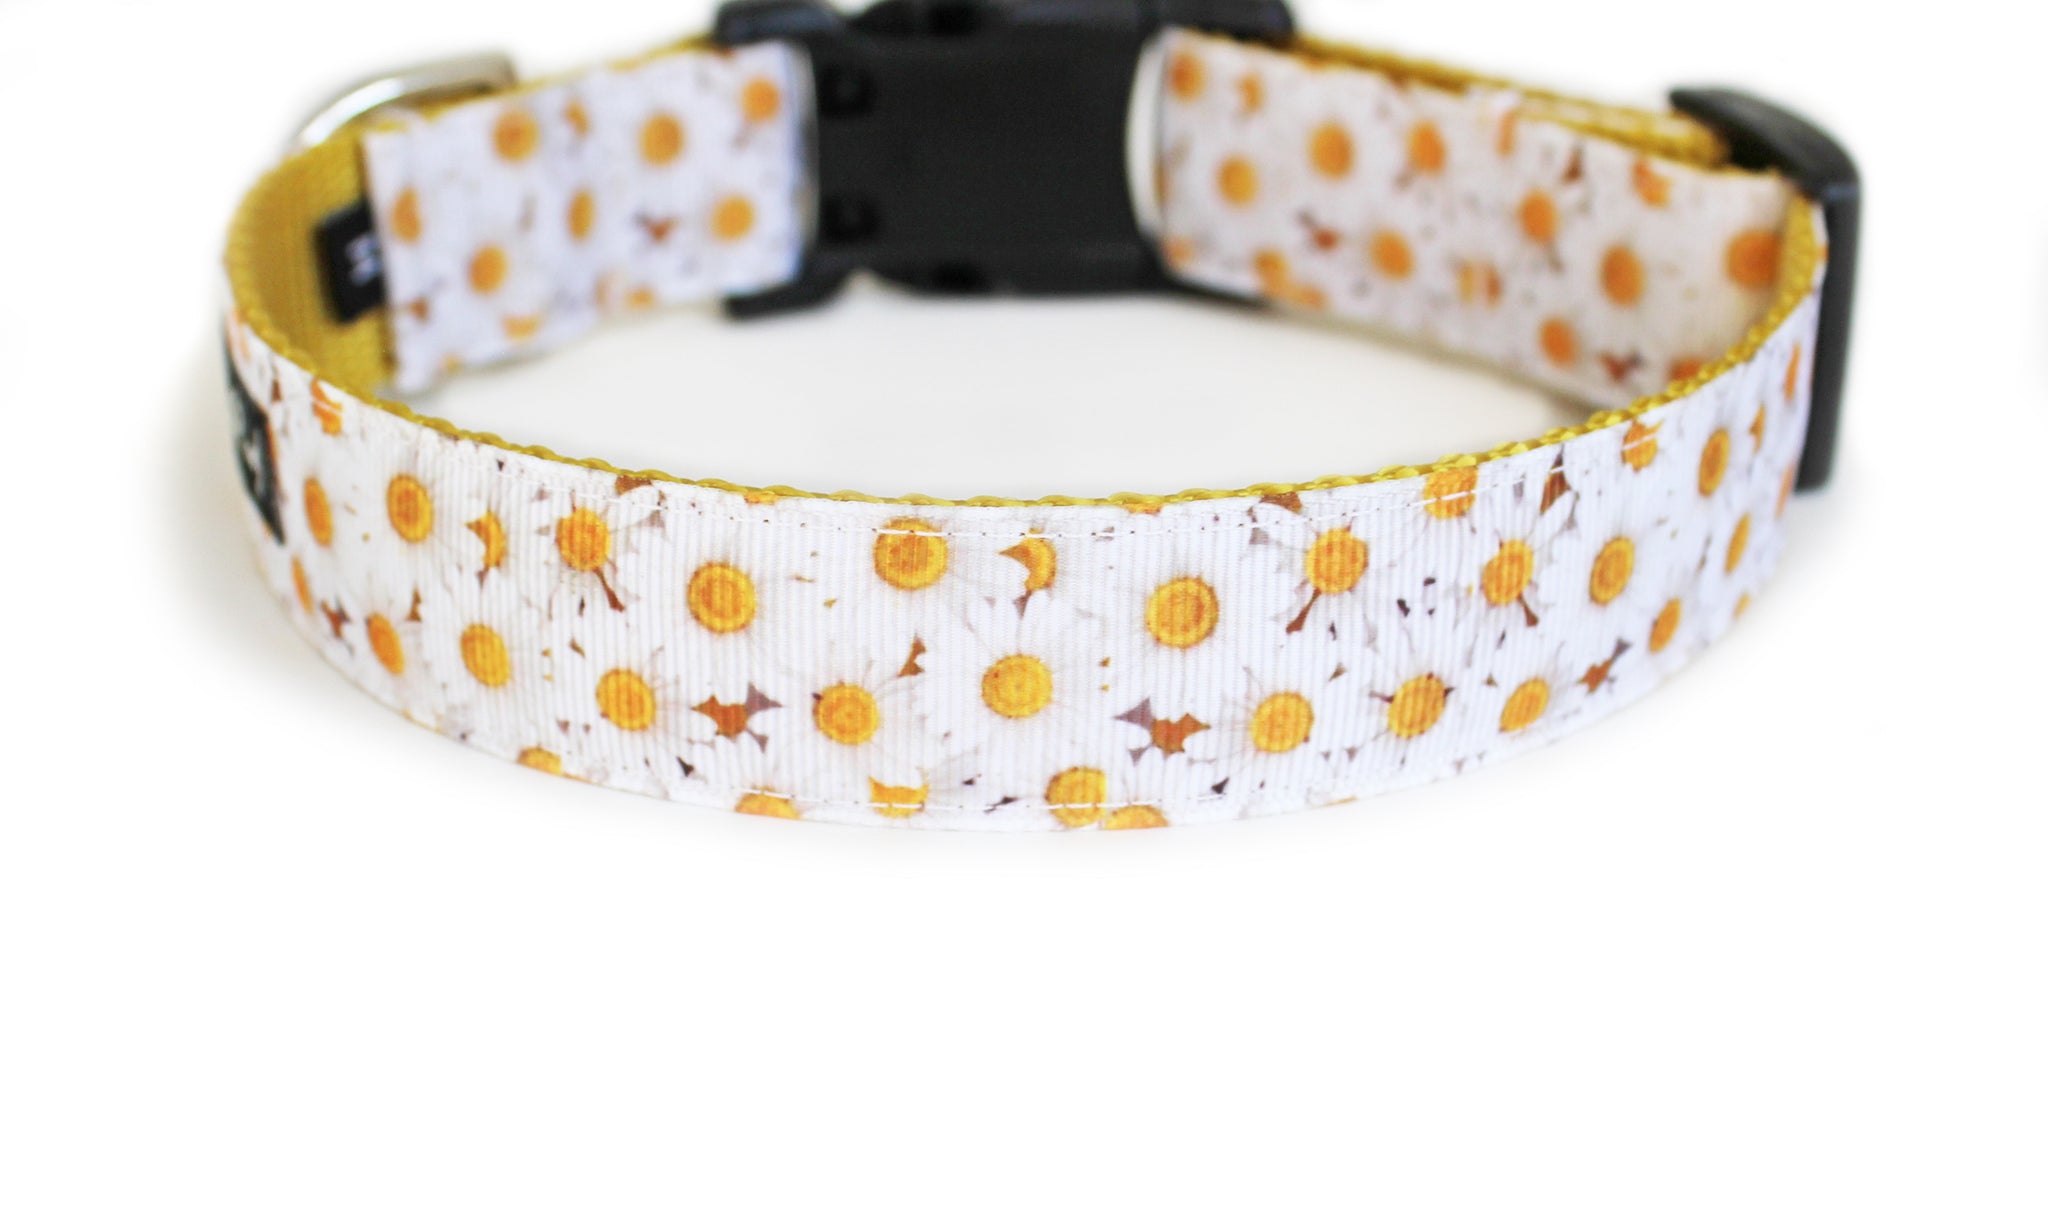 Daisy Dog Collar - You Had Me at Woof